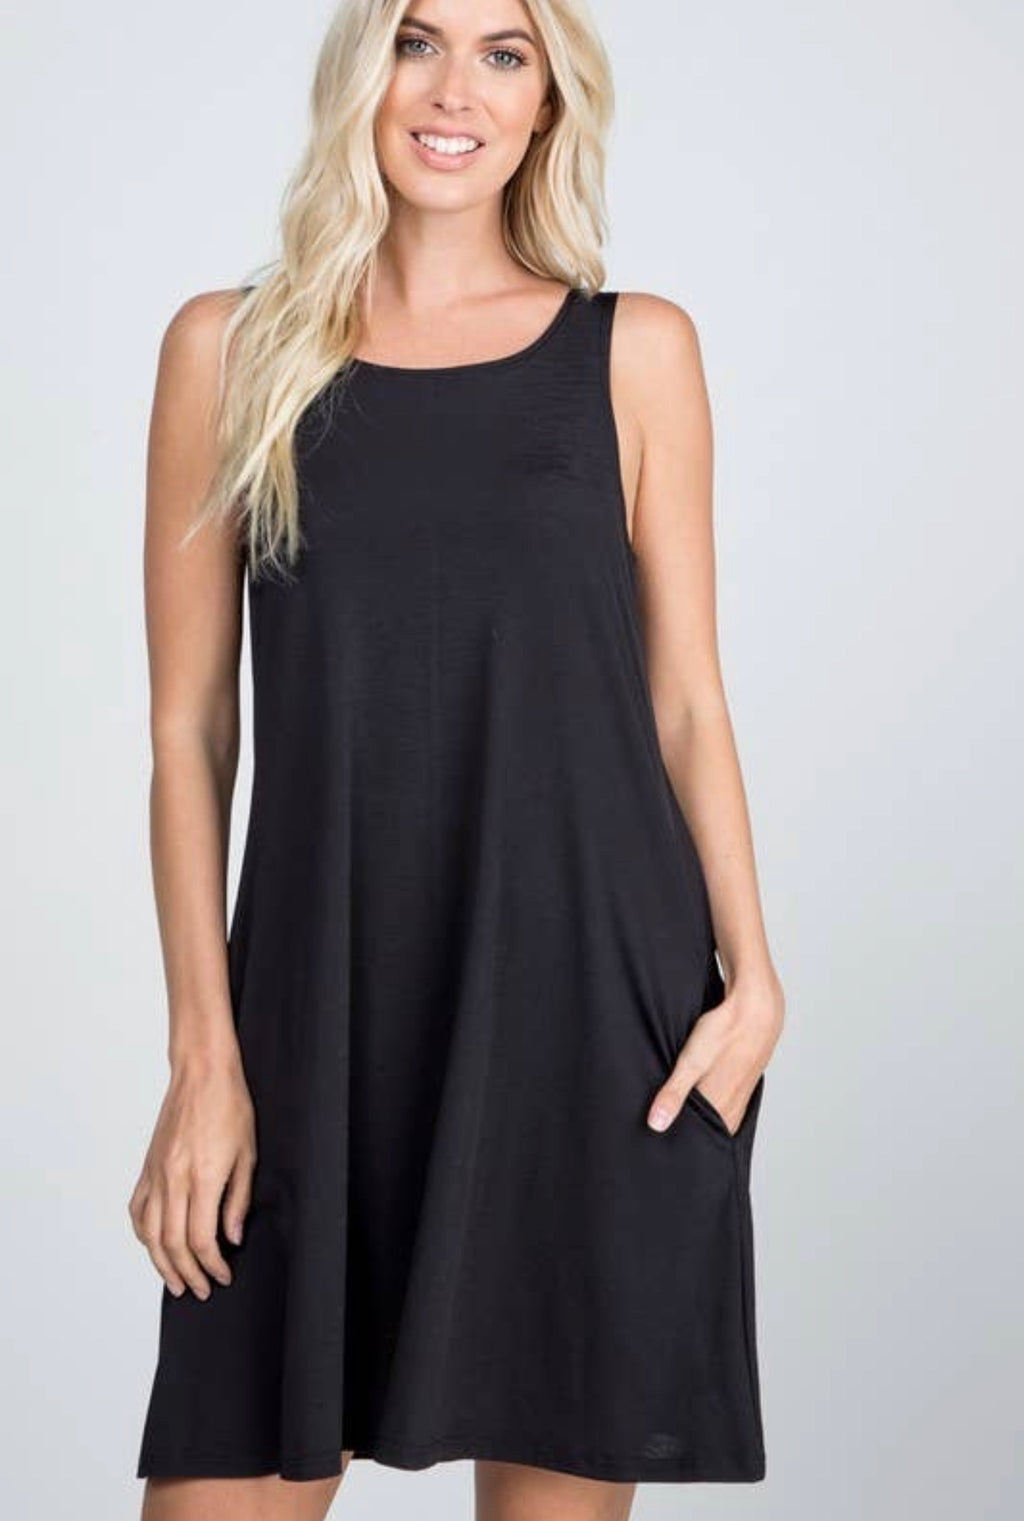 SLEEVELESS ROUND NECK SOLID DRESS WITH SIDE POCKET DETAIL (Or Blouse with Leggings Wear it your way!) - Lil Monkey Boutique